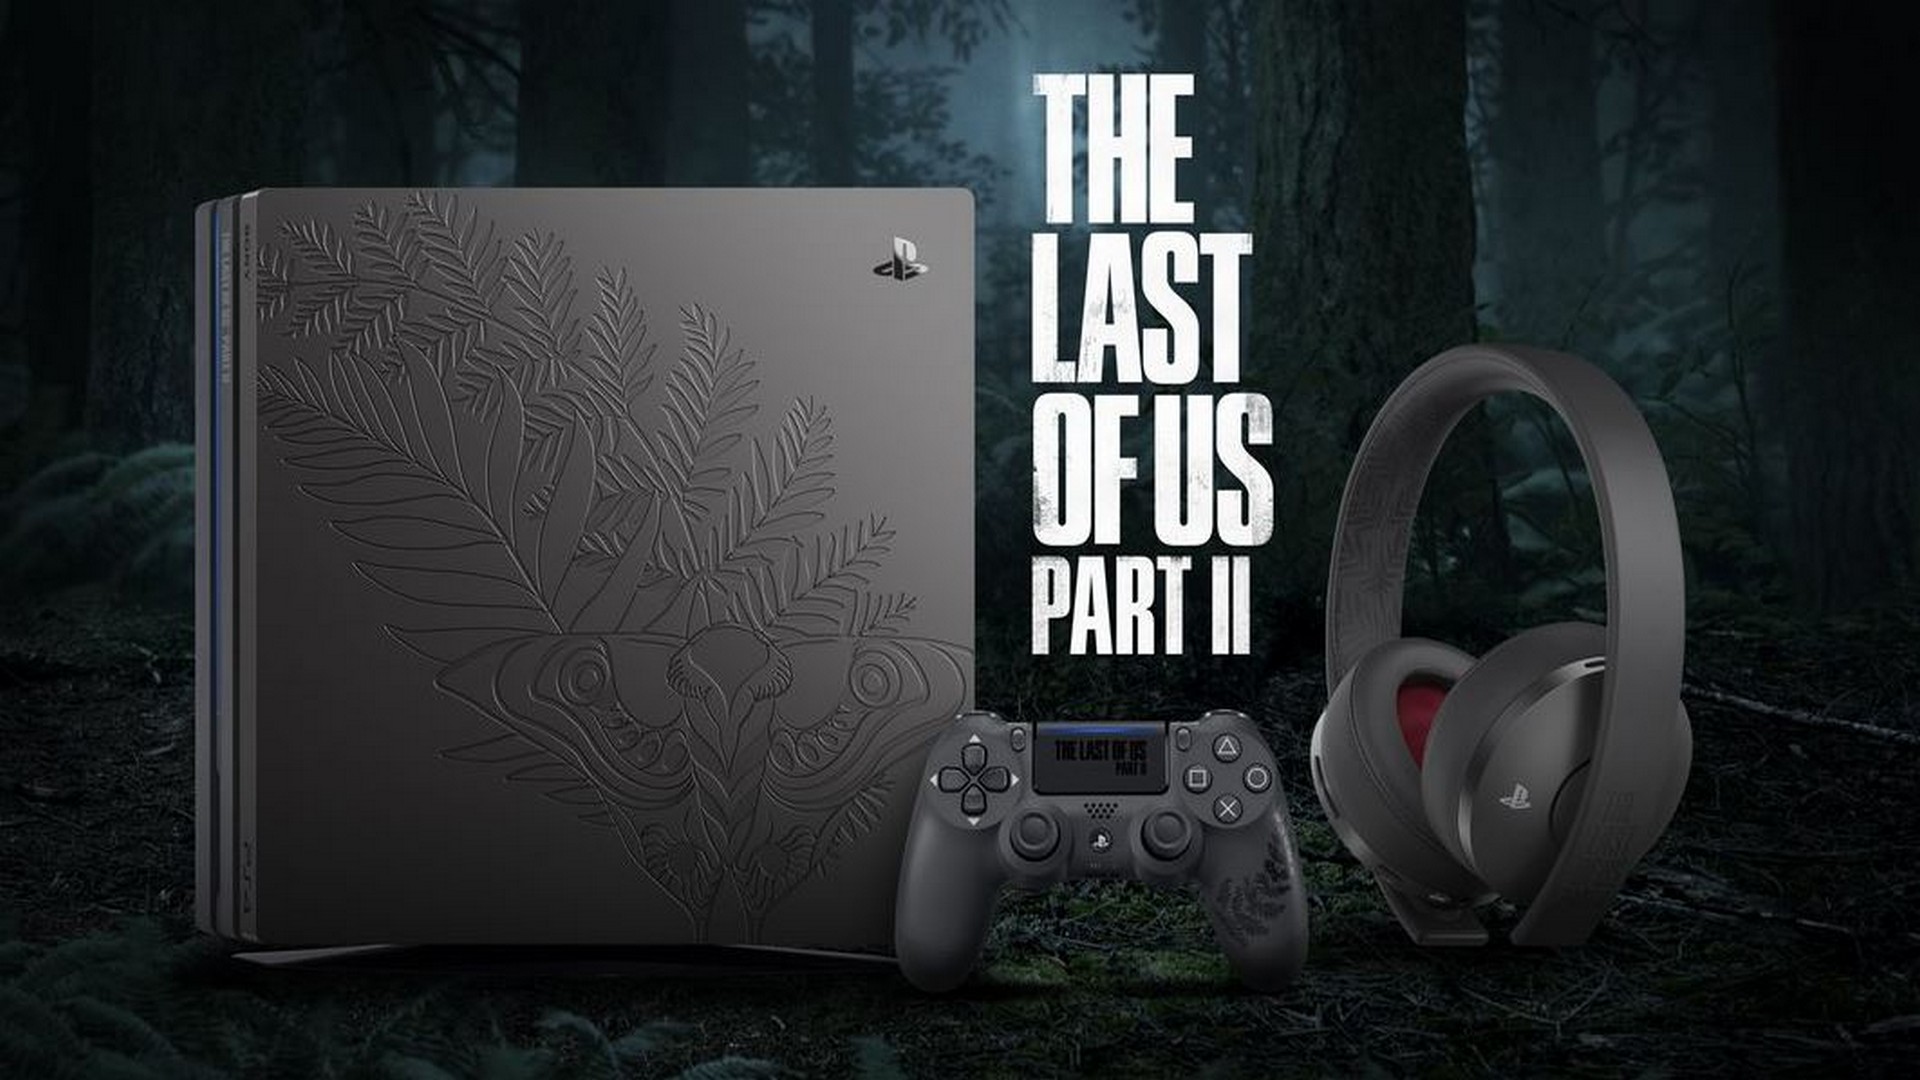 Celebrating The Last of Us Part II With A Limited Edition PS4 Pro Bundle & More